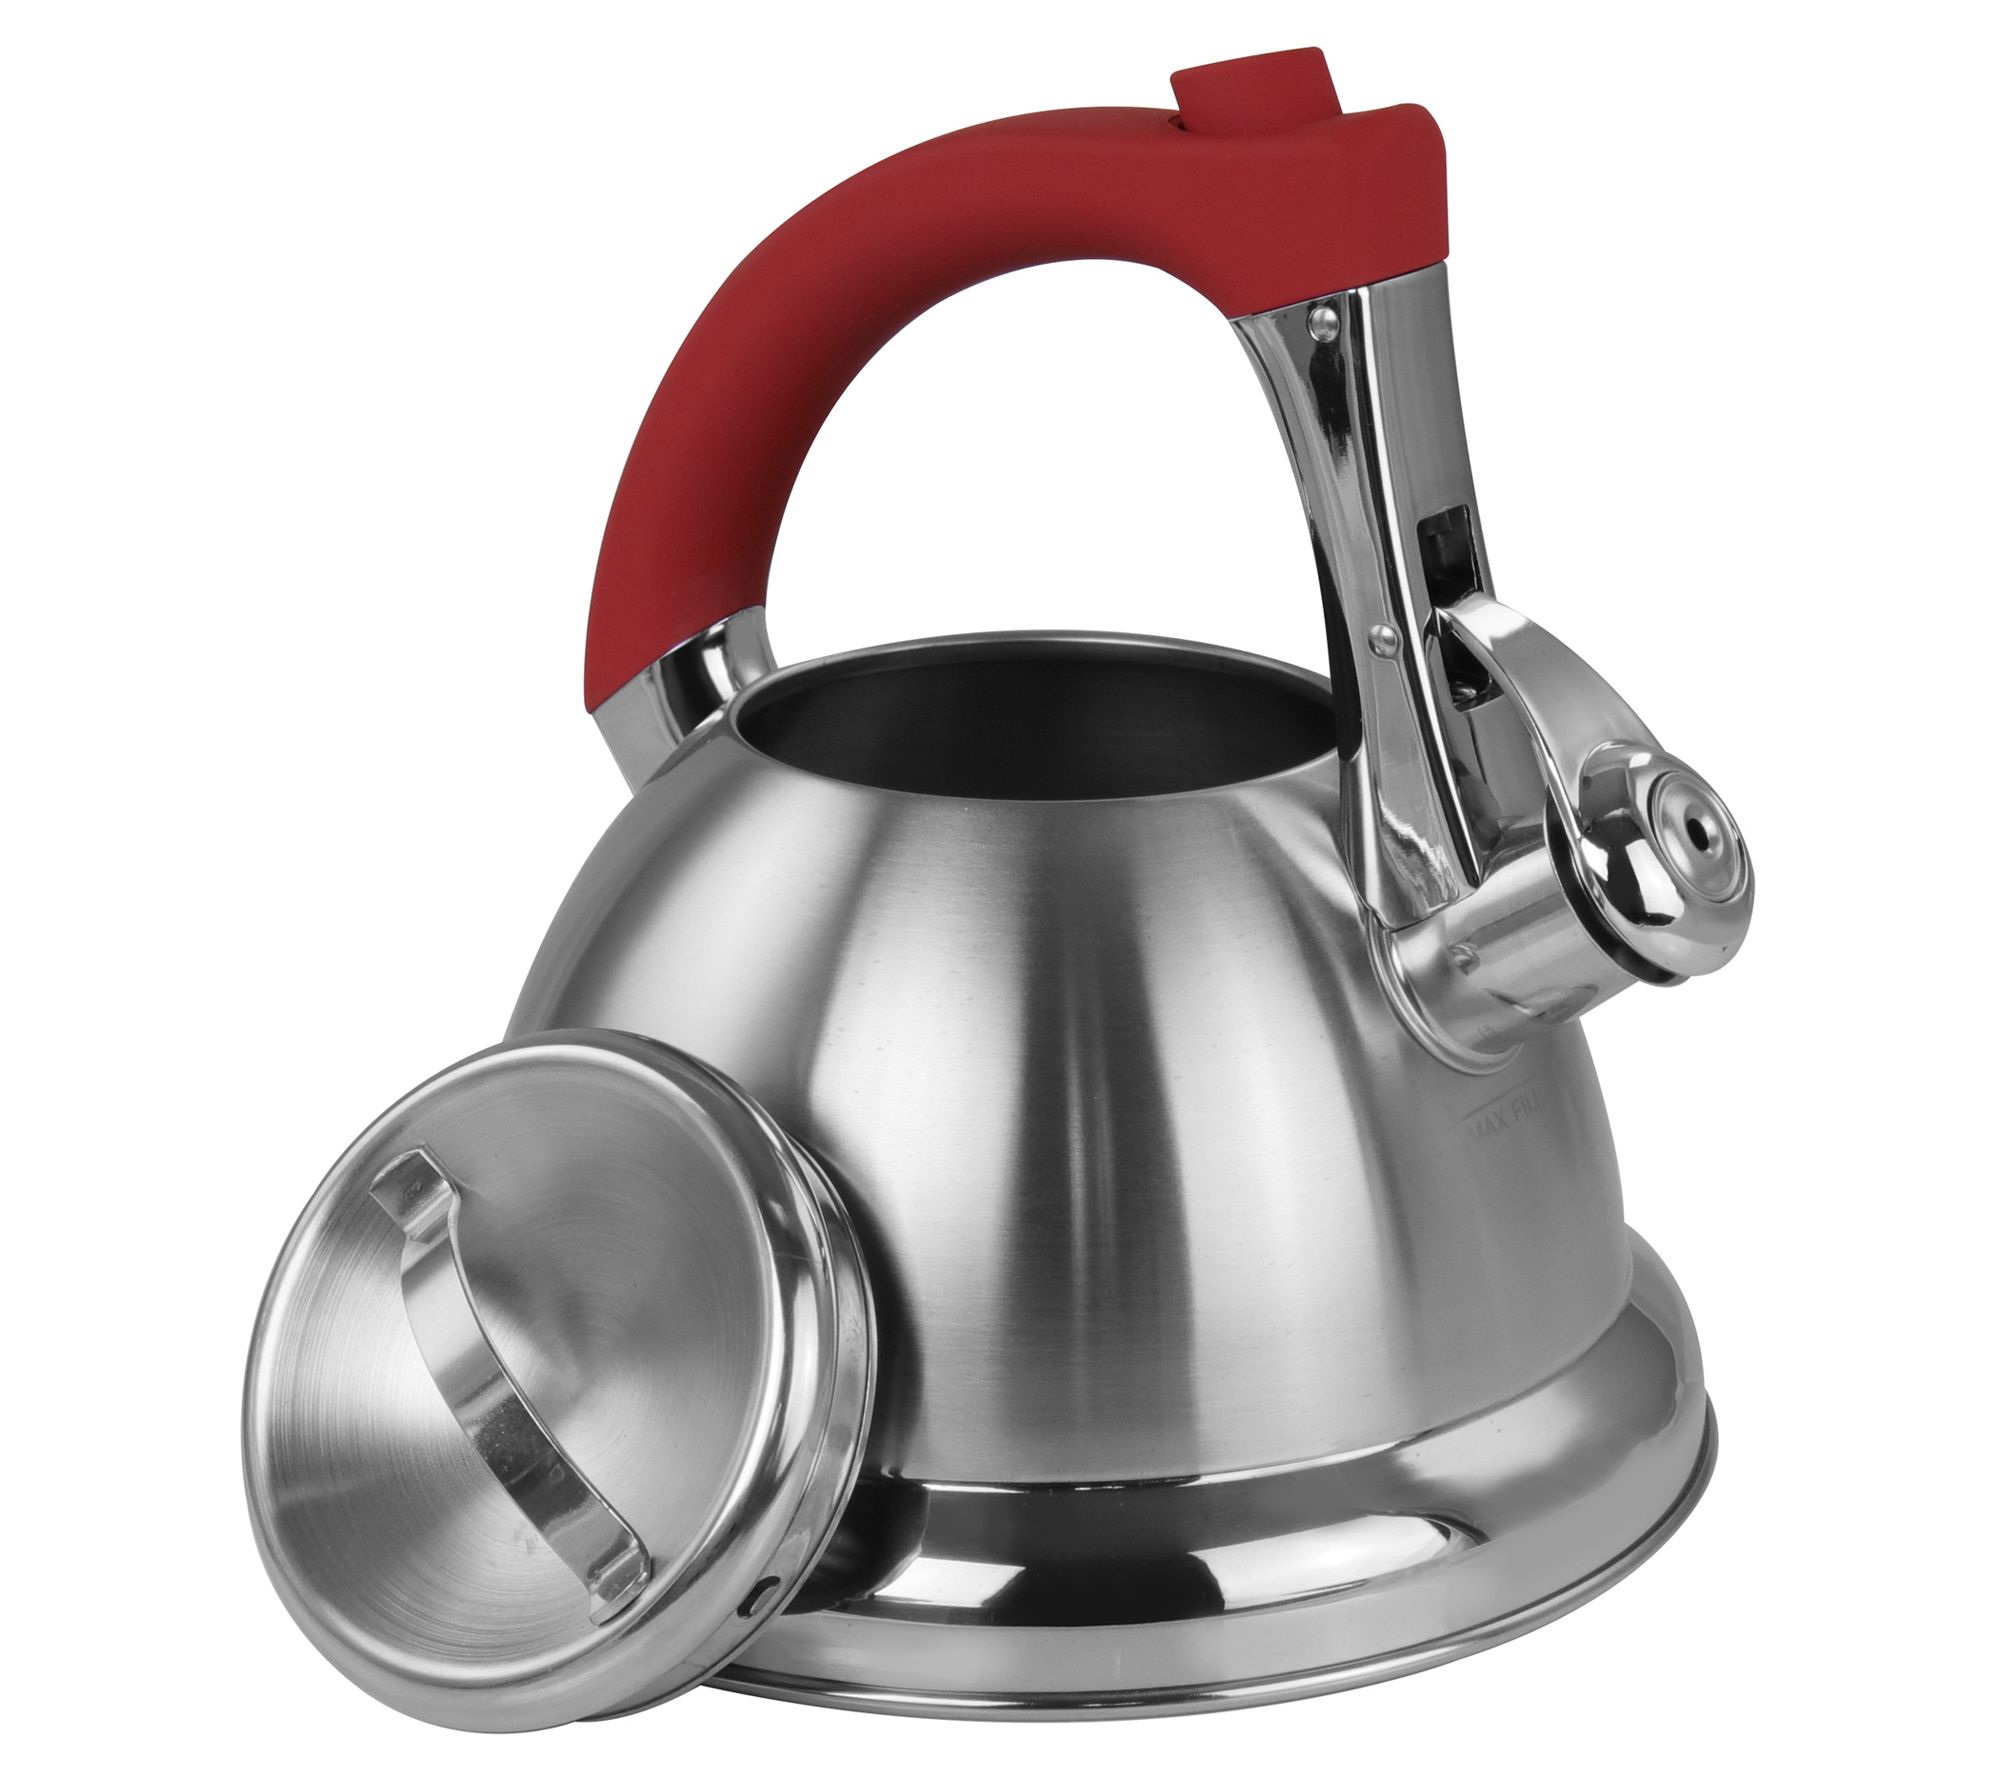 Gibson Mr Coffee 1.5 Quarts Stainless Steel Whistling Stovetop Tea